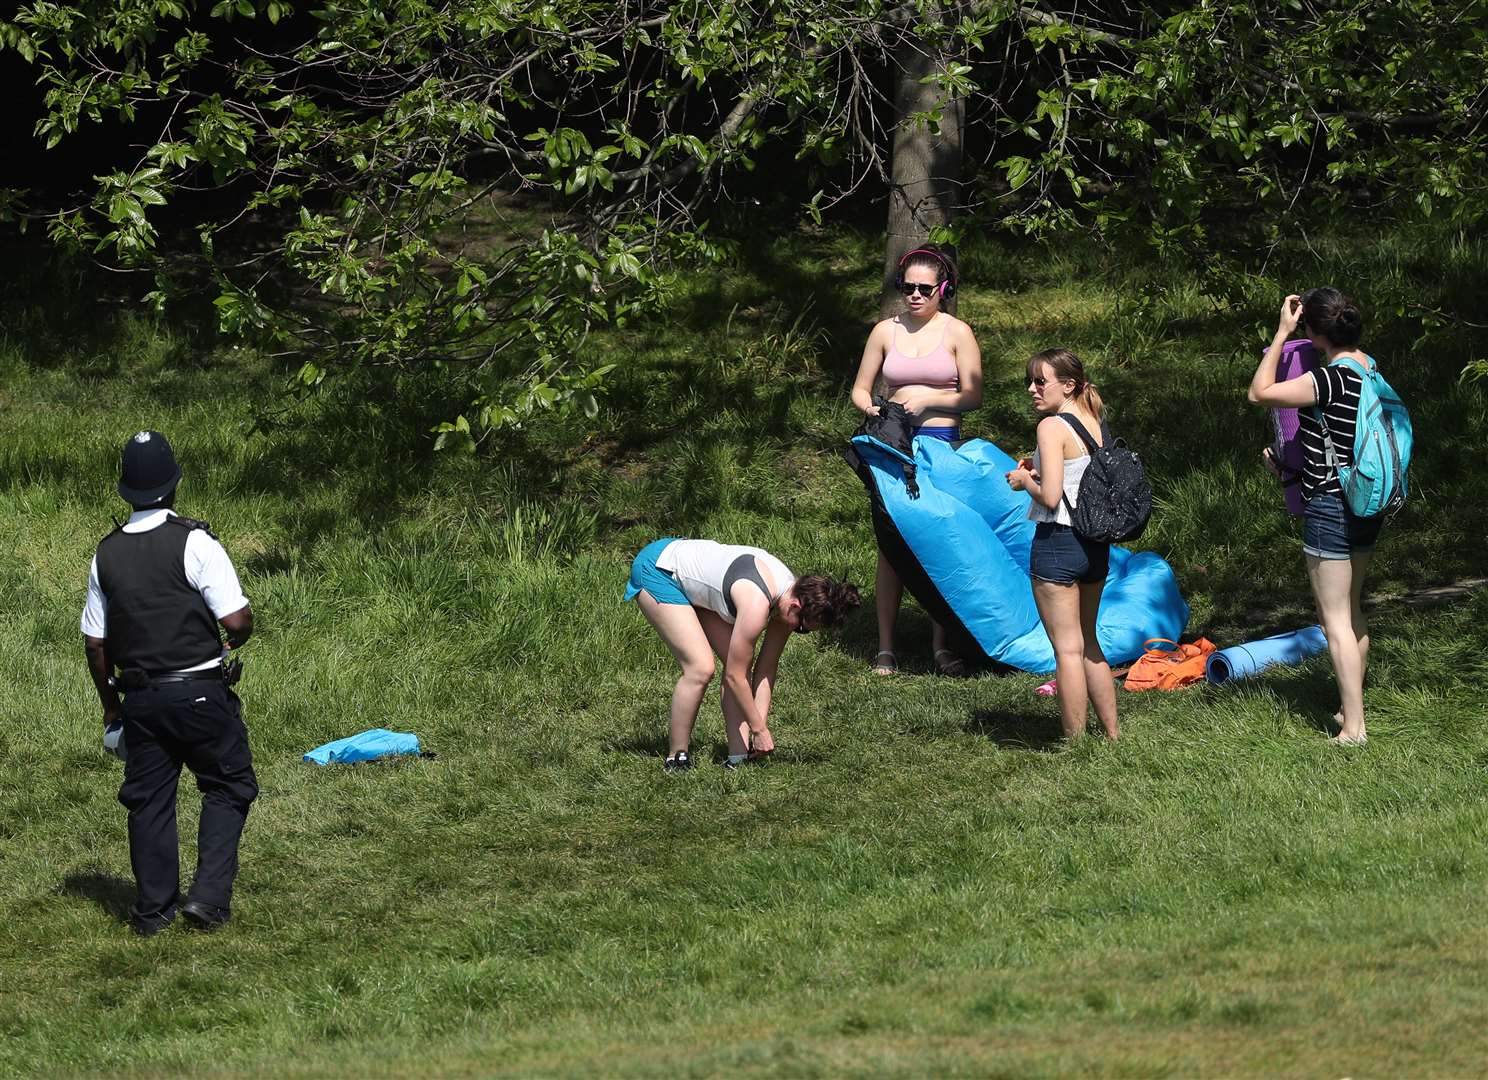 A police officer moves sunbathers on in Greenwich Park, London (Yui Mok/PA)